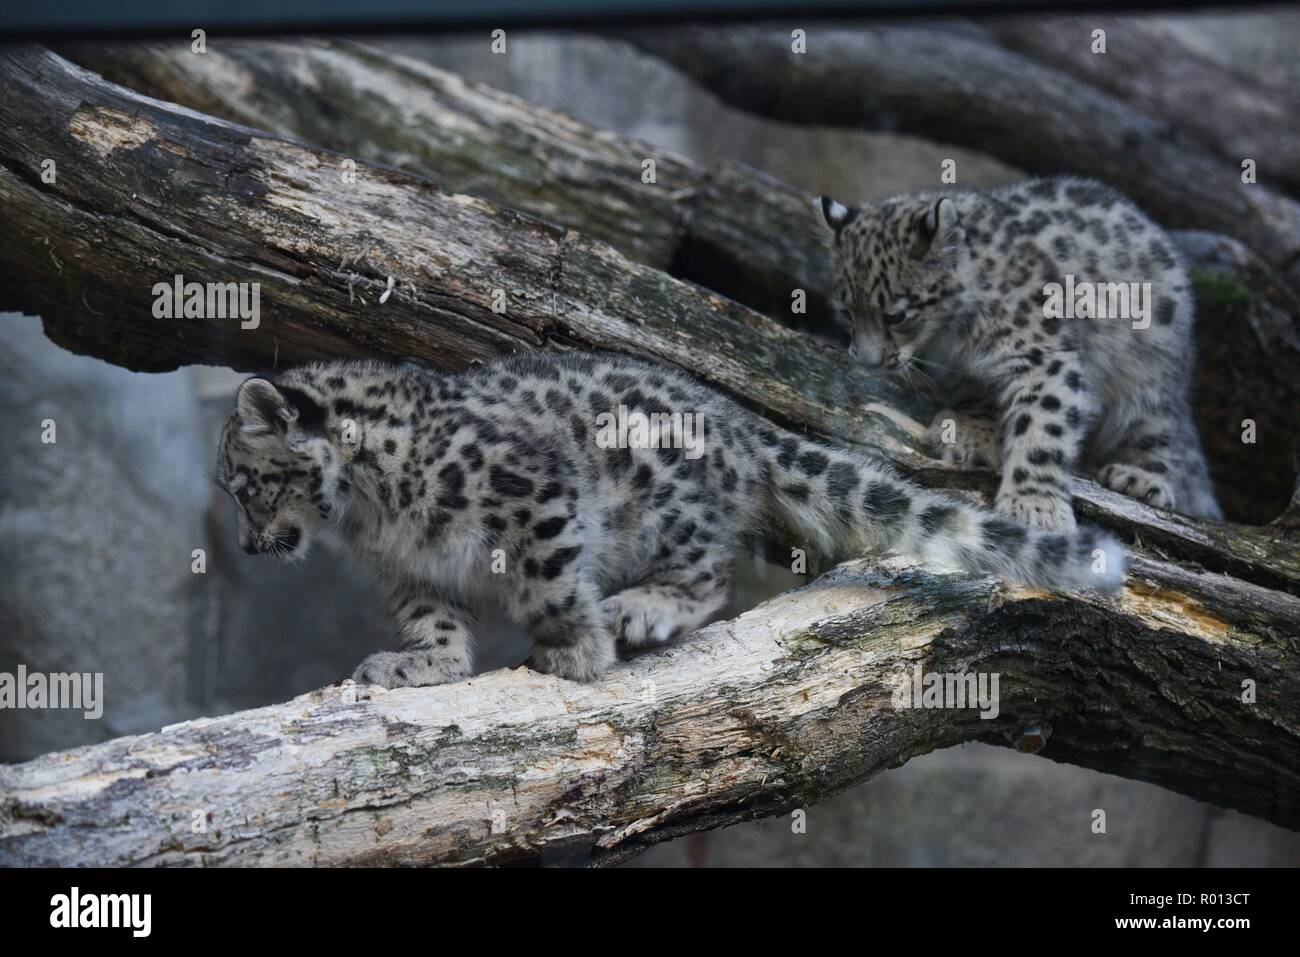 October 26, 2018 - Paris, France: Snow leopards at the zoo of the French National Museum of Natural History. Des jeunes pantheres des neiges a la menagerie du Jardin des Plantes. *** FRANCE OUT / NO SALES TO FRENCH MEDIA *** Stock Photo